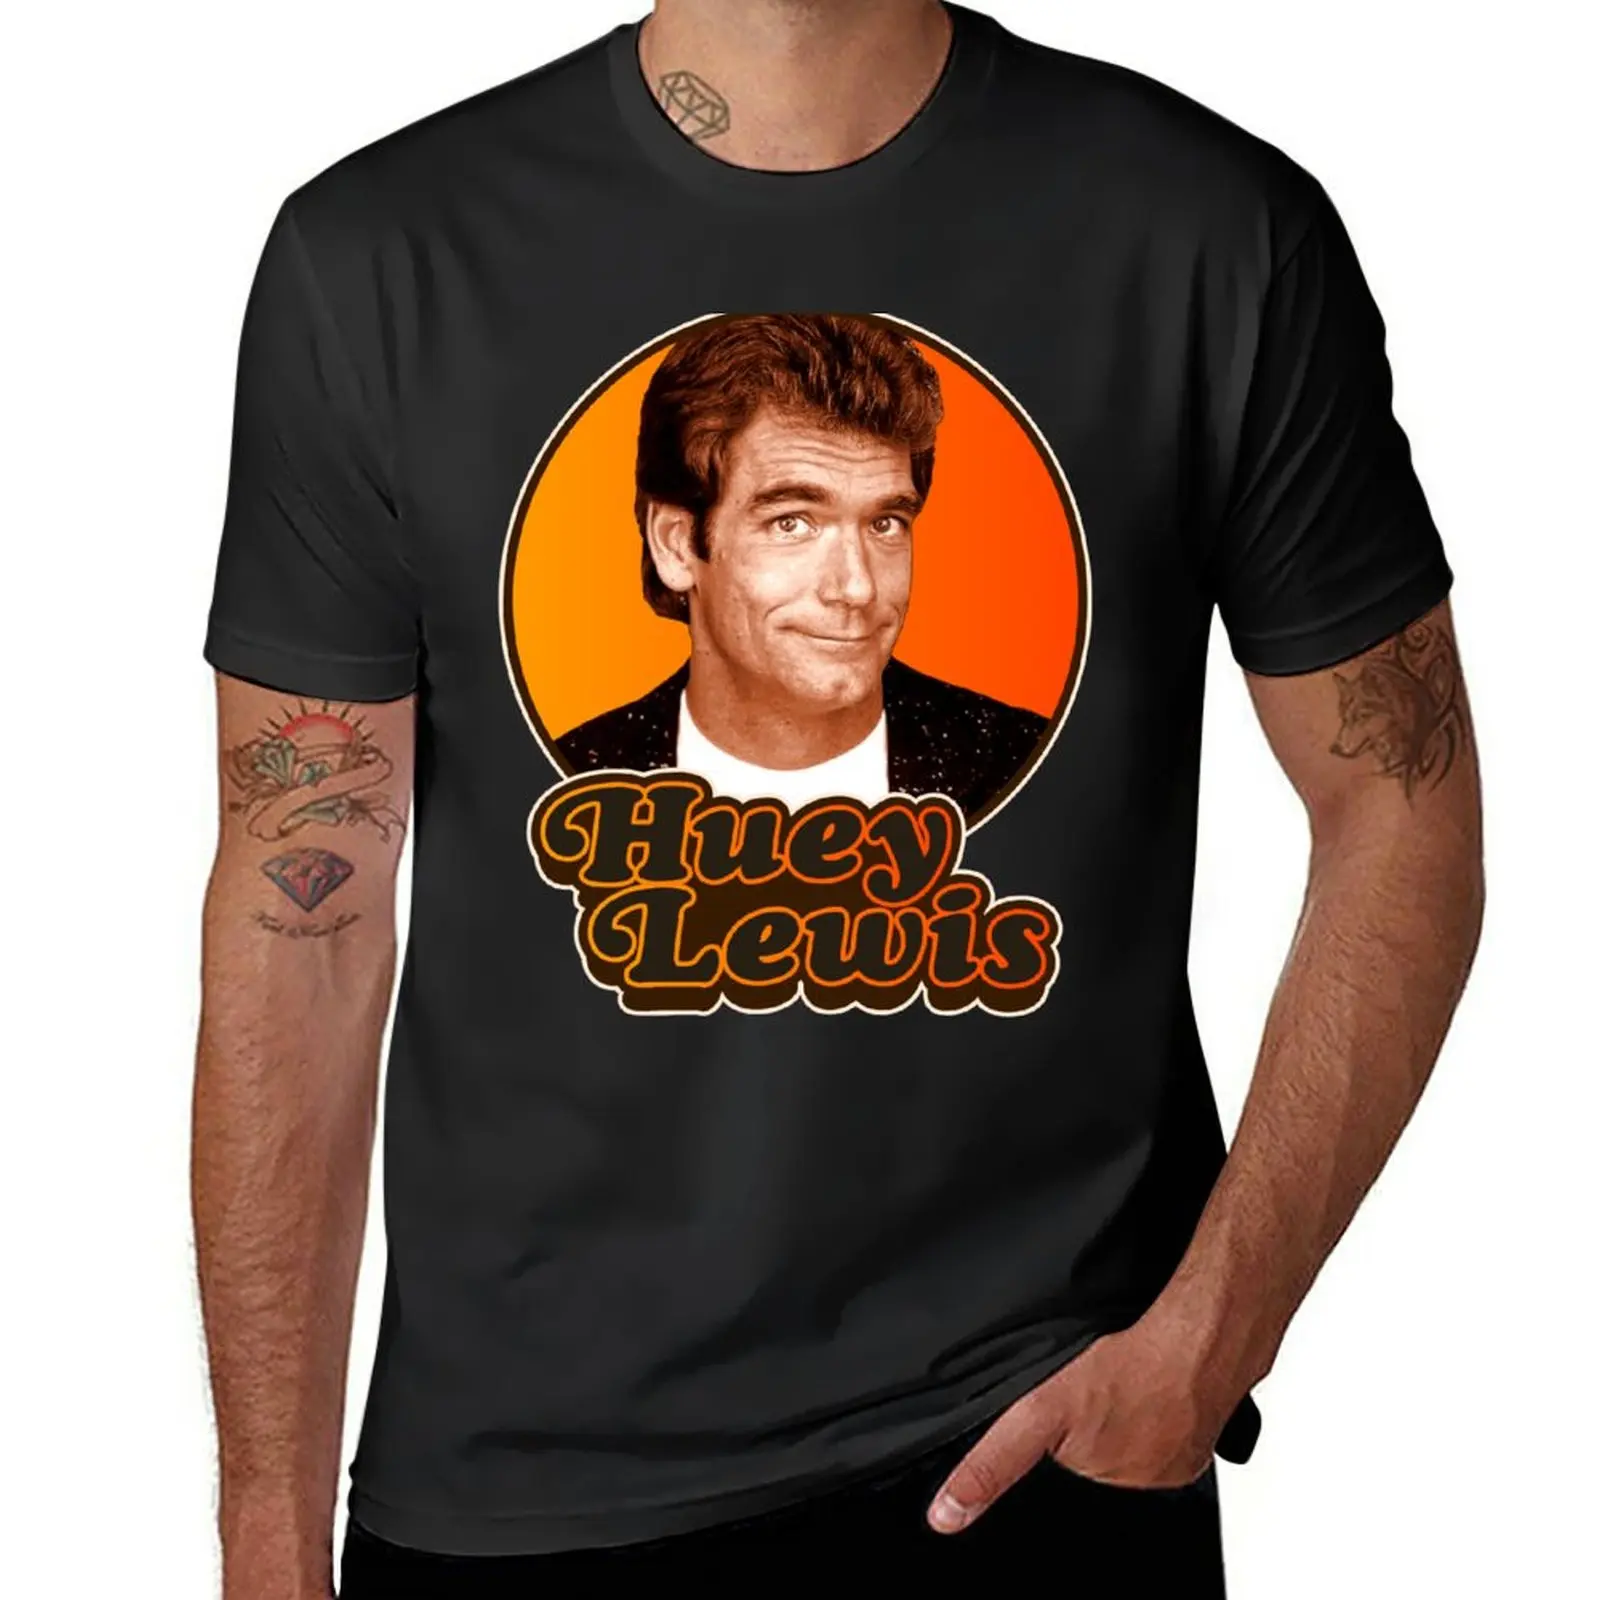 

New Huey Lewis and the News Tribute T-Shirt t shirt man custom t shirt t shirts for men graphic